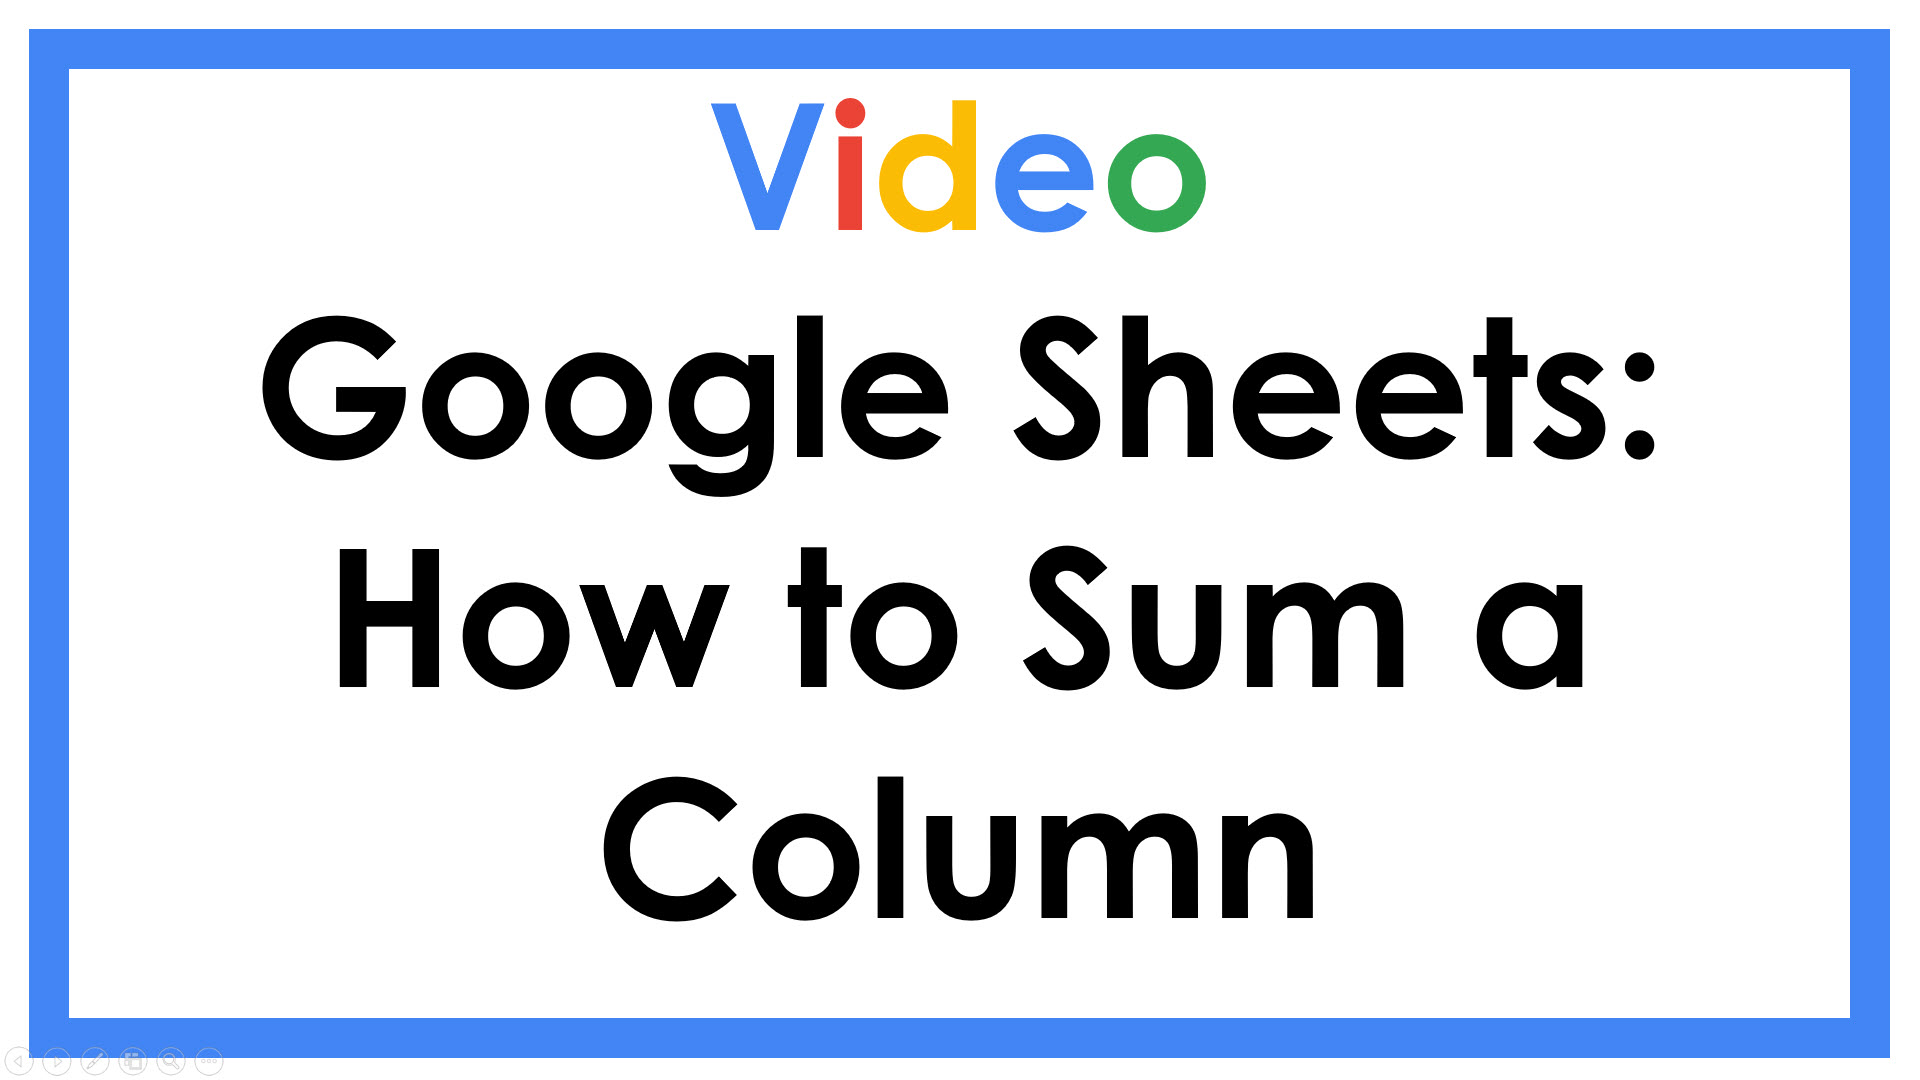 Google Sheets: How to Sum a Column